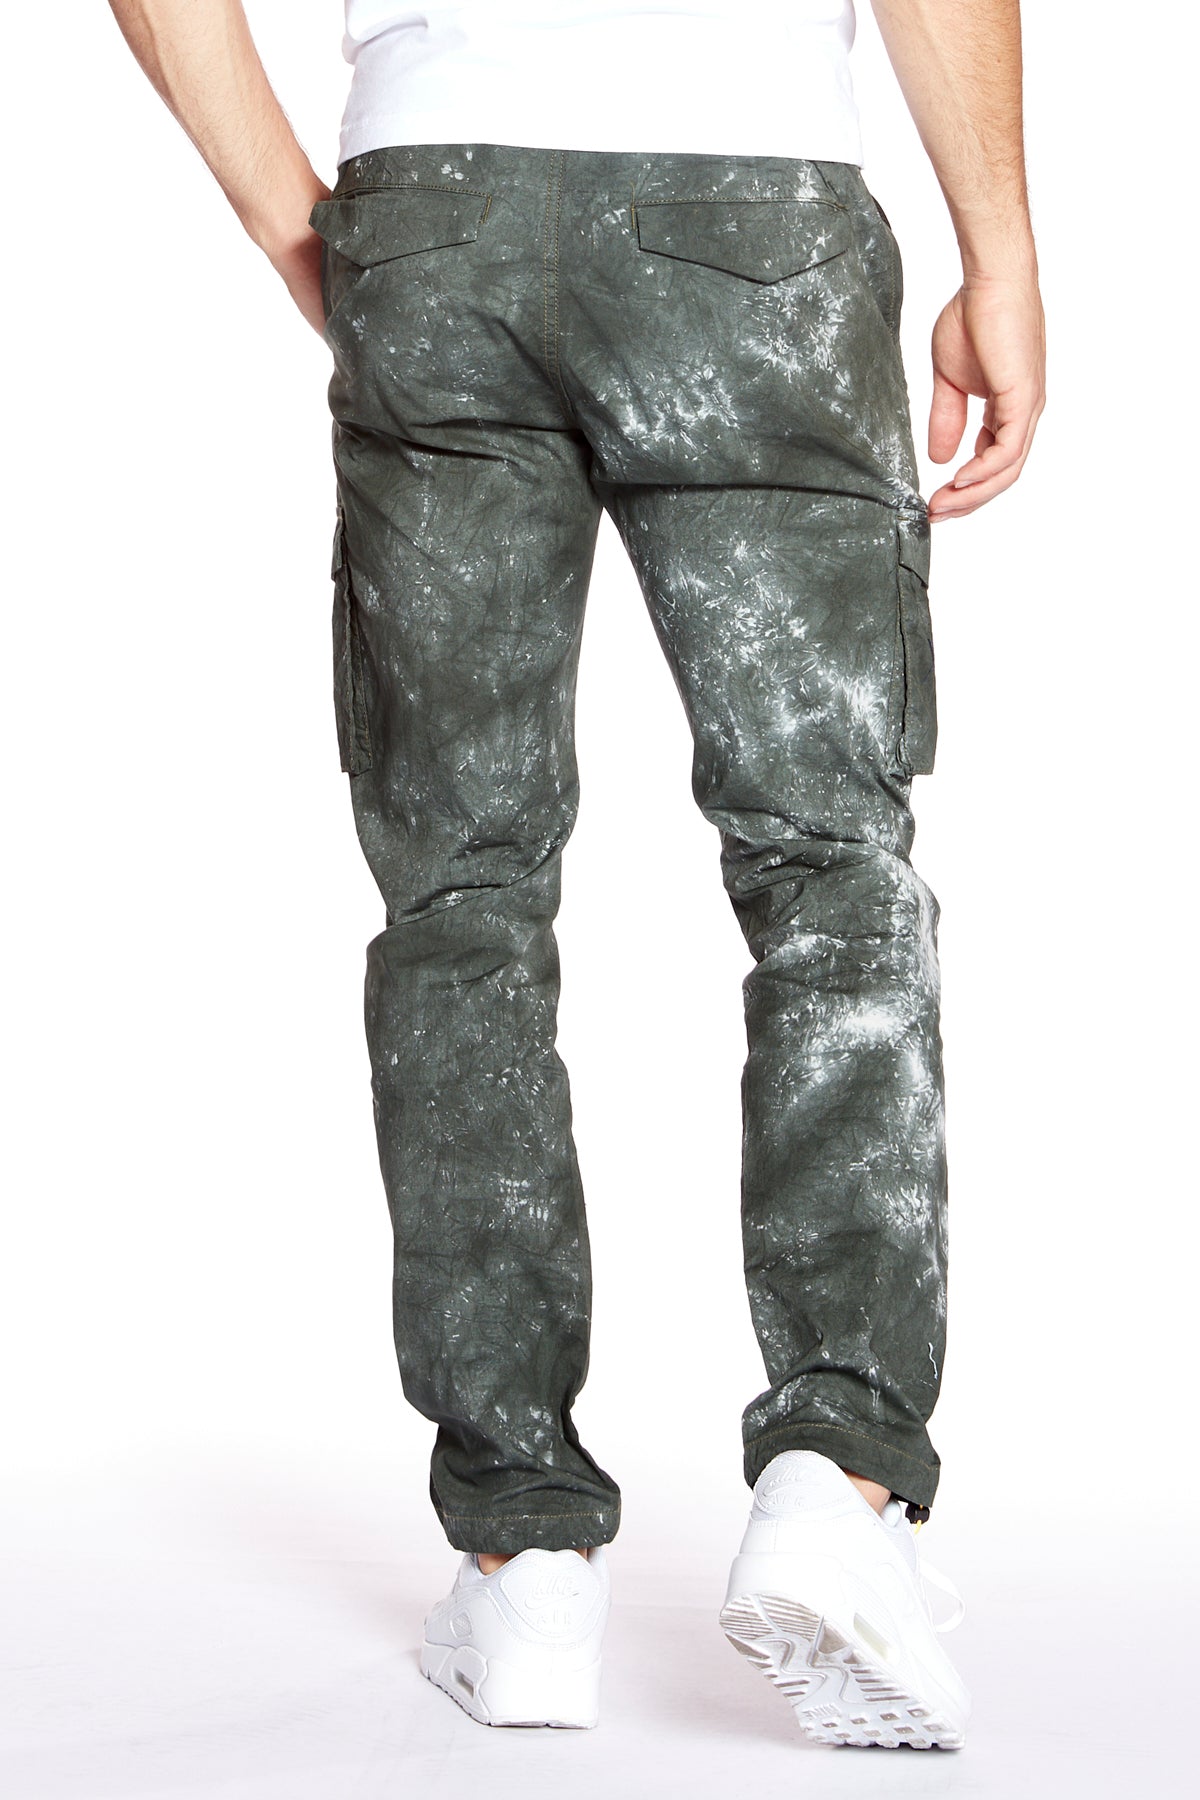 DEAN - Slim Fit Cargo Chinos (Convertible Joggers) - Olive - DENIM SOCIETY™